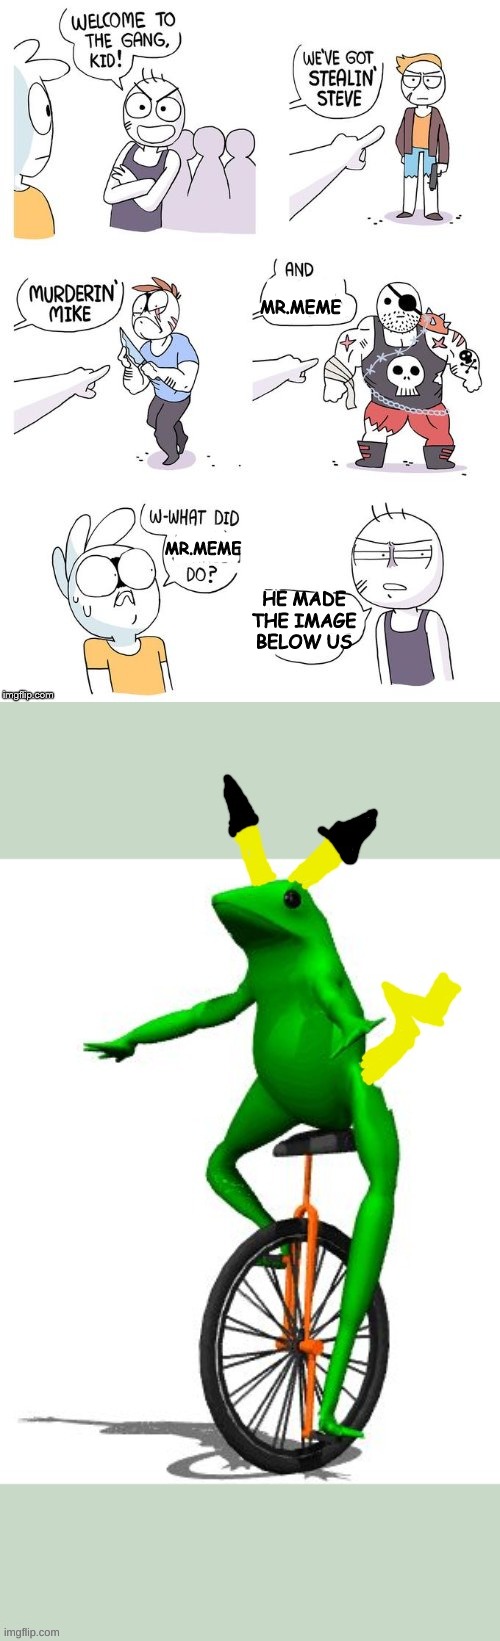 MR.MEME; MR.MEME; HE MADE THE IMAGE BELOW US | image tagged in crimes johnson,here comes dat pikachu | made w/ Imgflip meme maker